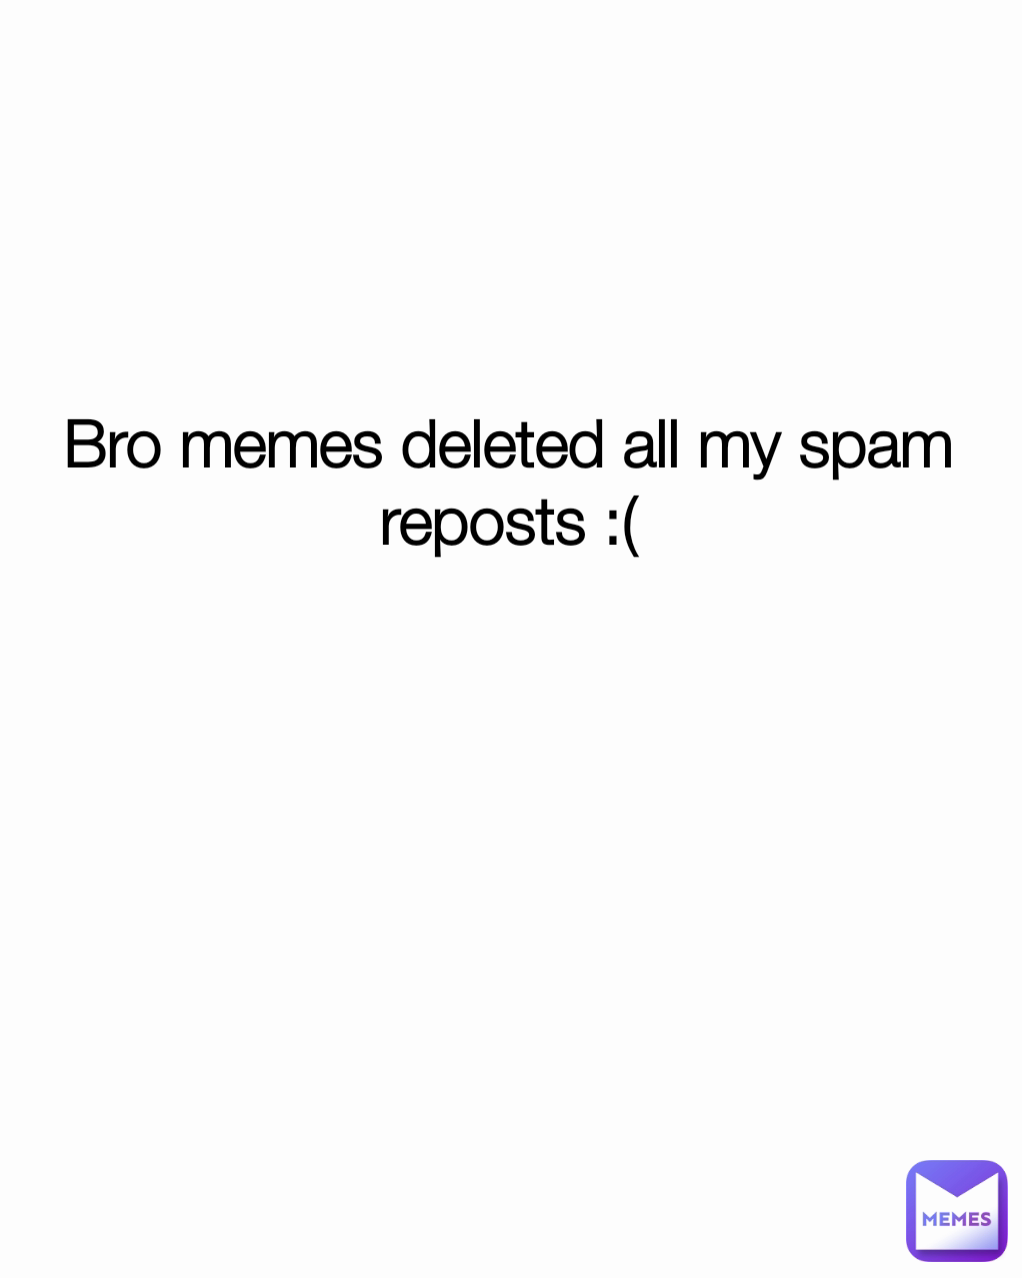 Bro memes deleted all my spam reposts :( | @Fun_Facts | Memes